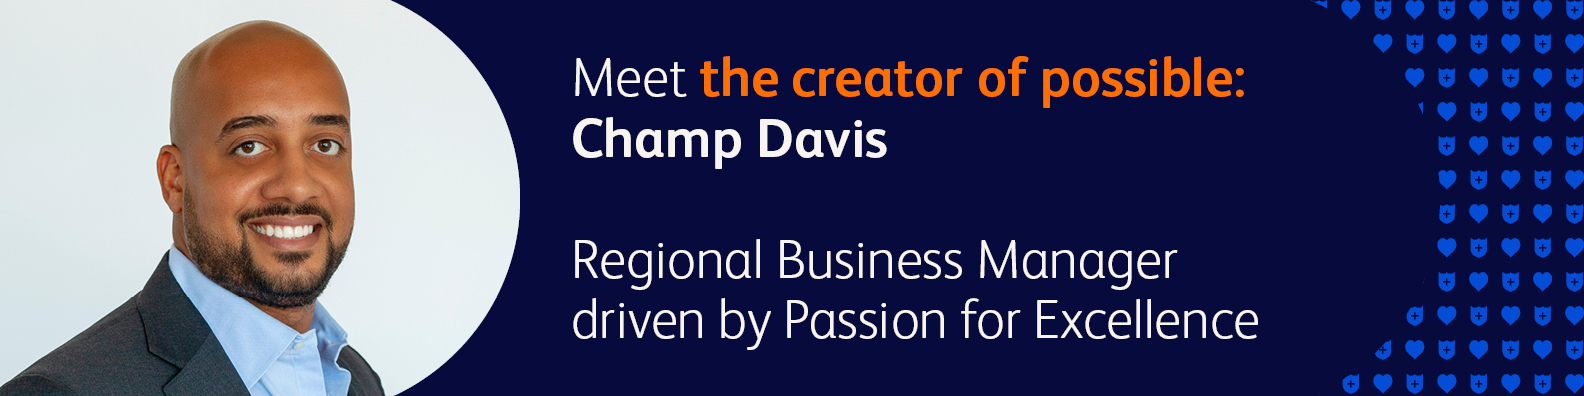 Champ Davis, Regional Business Manager for Integrated Diagnostic Solutions (IDS) at BD